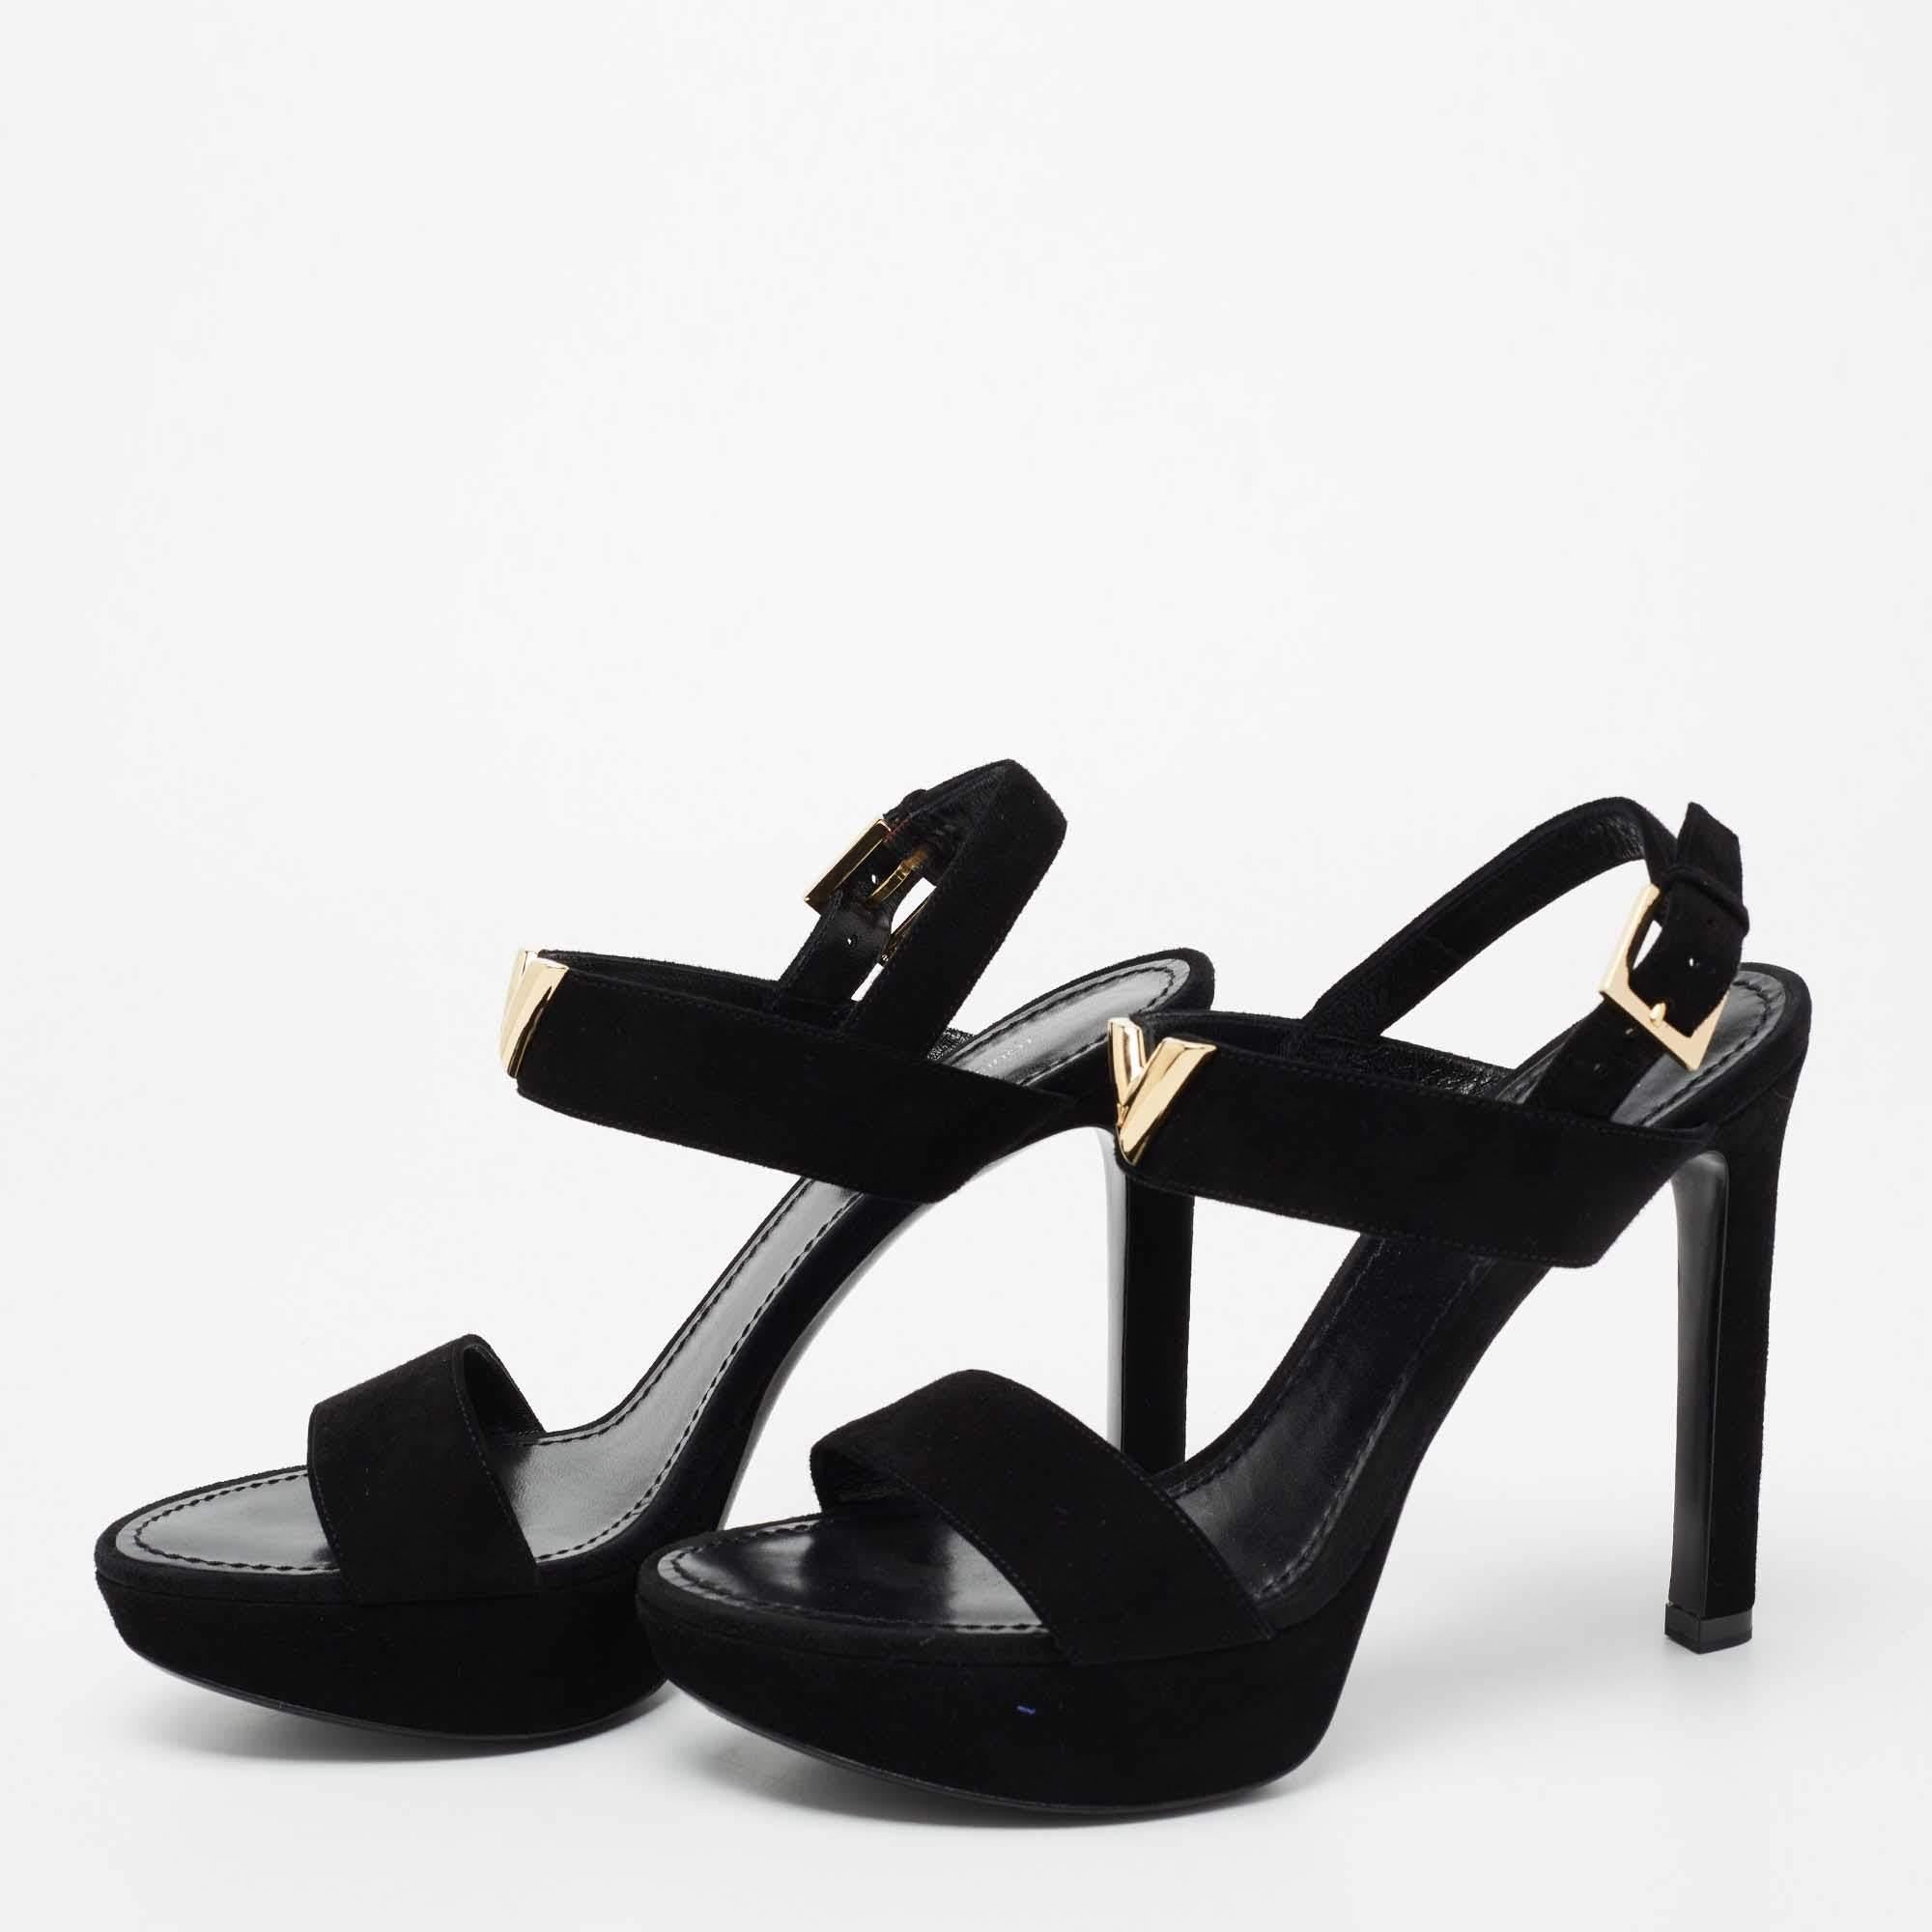 Beautifully designed and lovely to look at, this pair of sandals by Louis Vuitton is a keeper. They carry a suede exterior, buckle fastenings, and 11.5 cm heels supported by platforms. The black sandals are accented by gold-tone hardware detailing